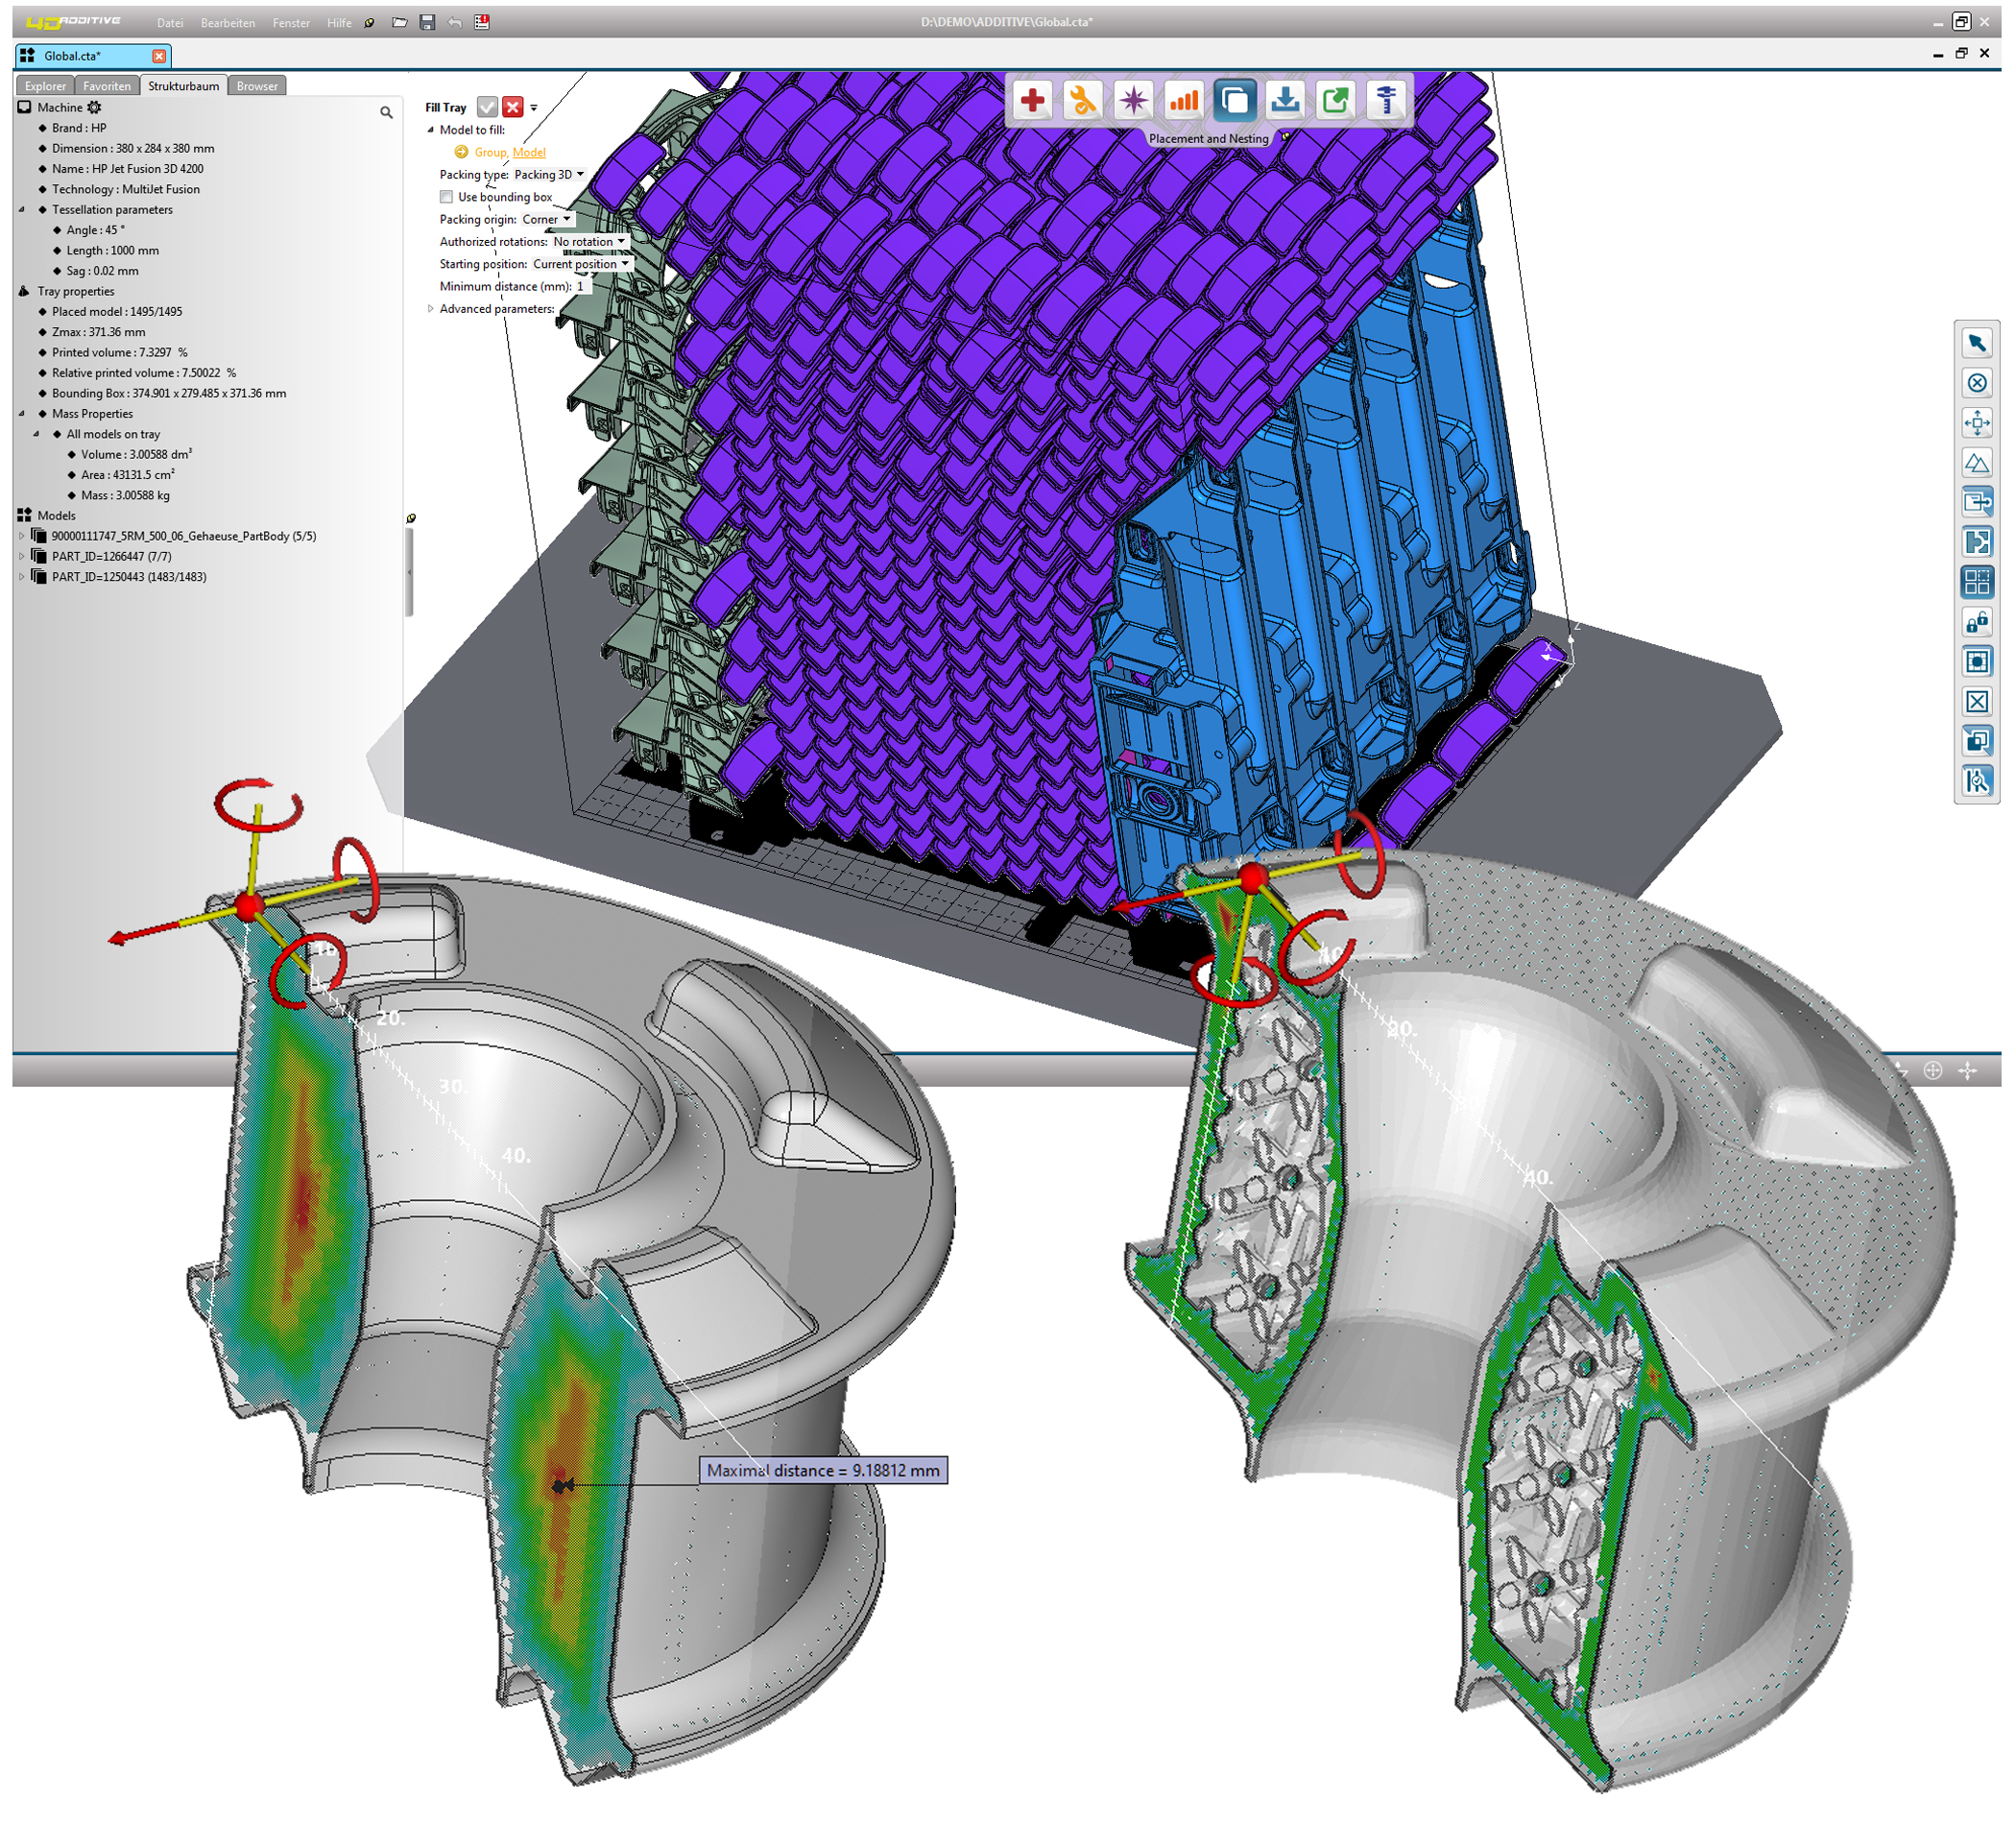 The new 4D_Additive software version uses artificial intelligence for nesting. Image via CoreTechnologie.